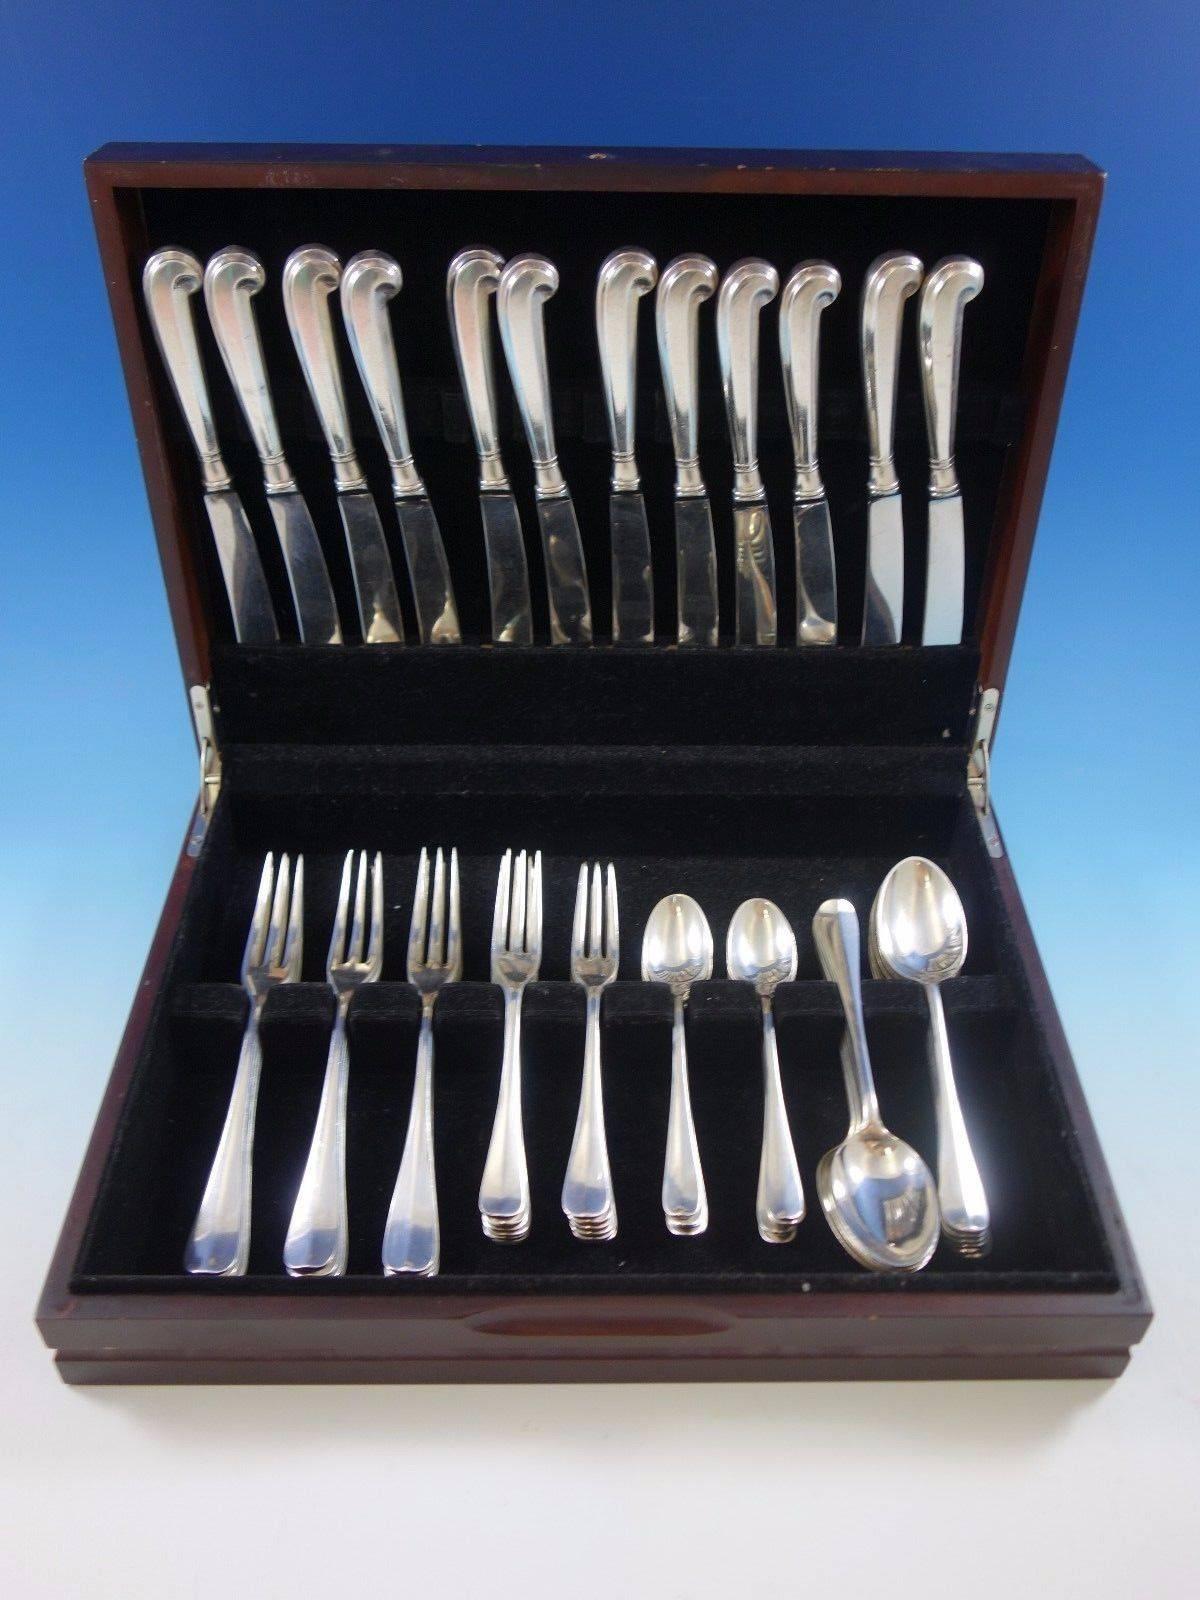 Queen Ann-Williamsburg by Stieff sterling silver flatware set of 60 pieces. This set includes: 

12 dinner knives, 9 3/8